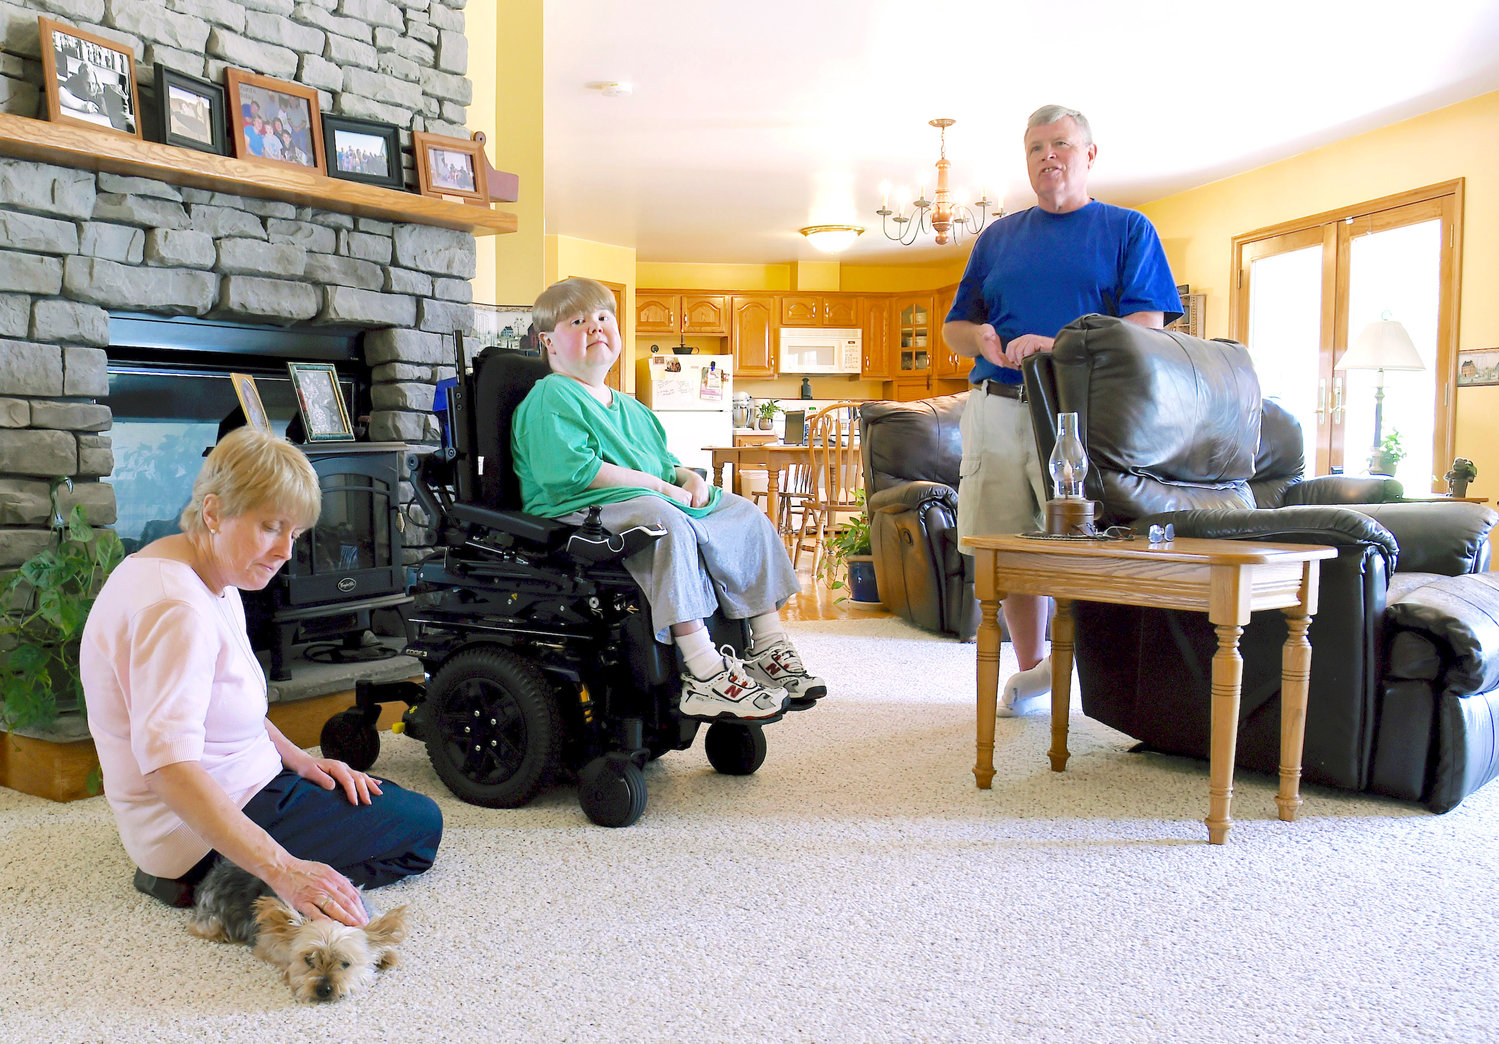 Terry Horgan with his parents in the family’s Montour Falls, N.Y., home. Horgan, a 27-year-old who had Duchenne muscular dystrophy, died last month.